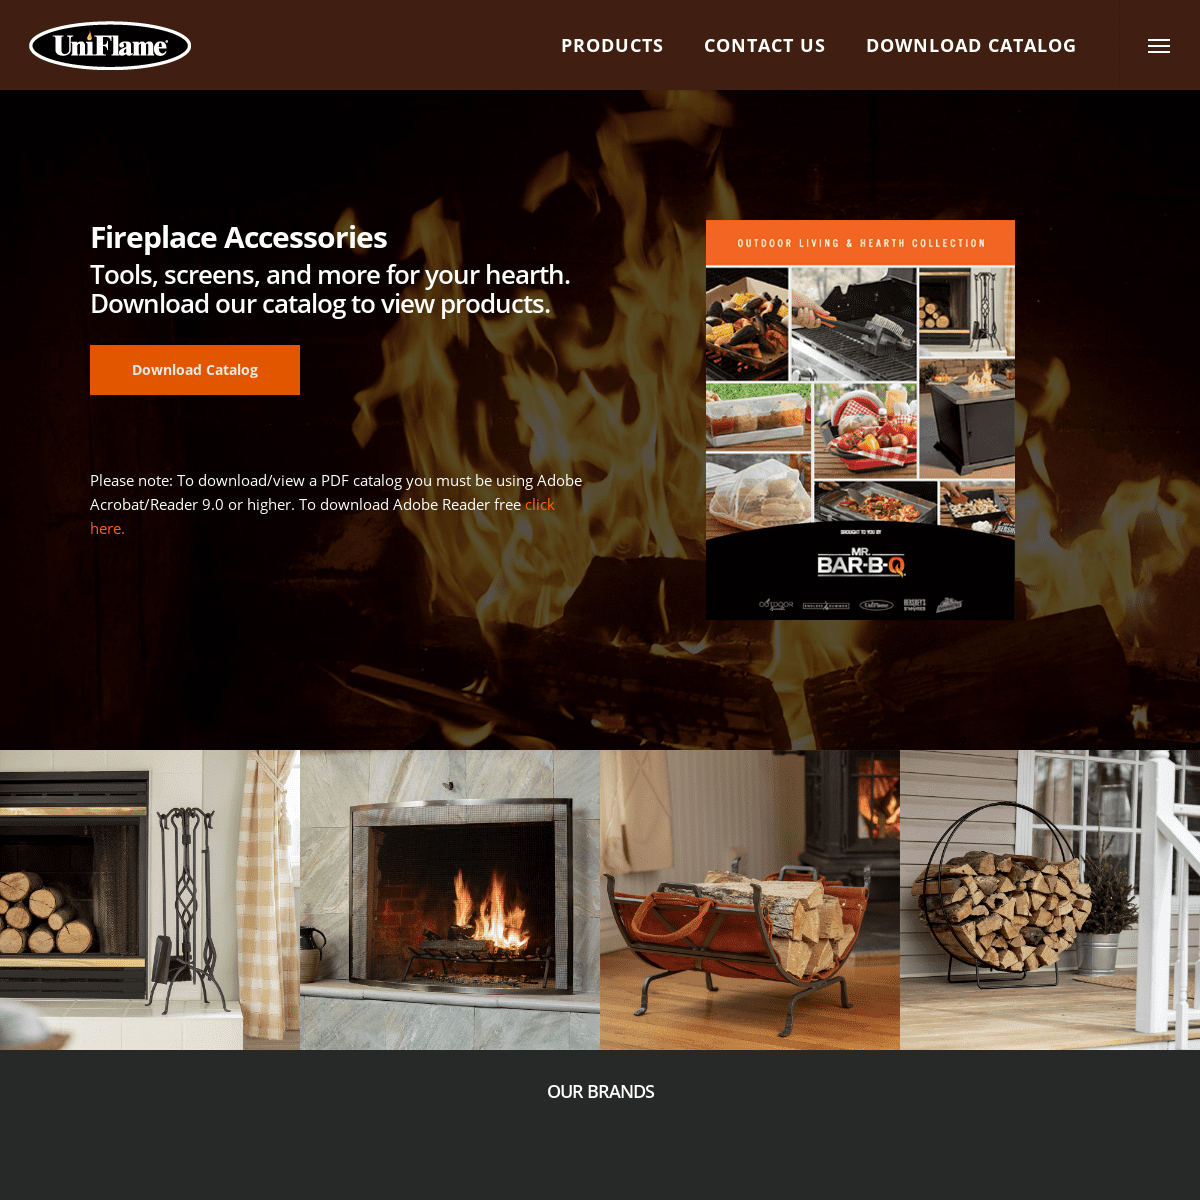 Uniflame – Fireplace Accessories